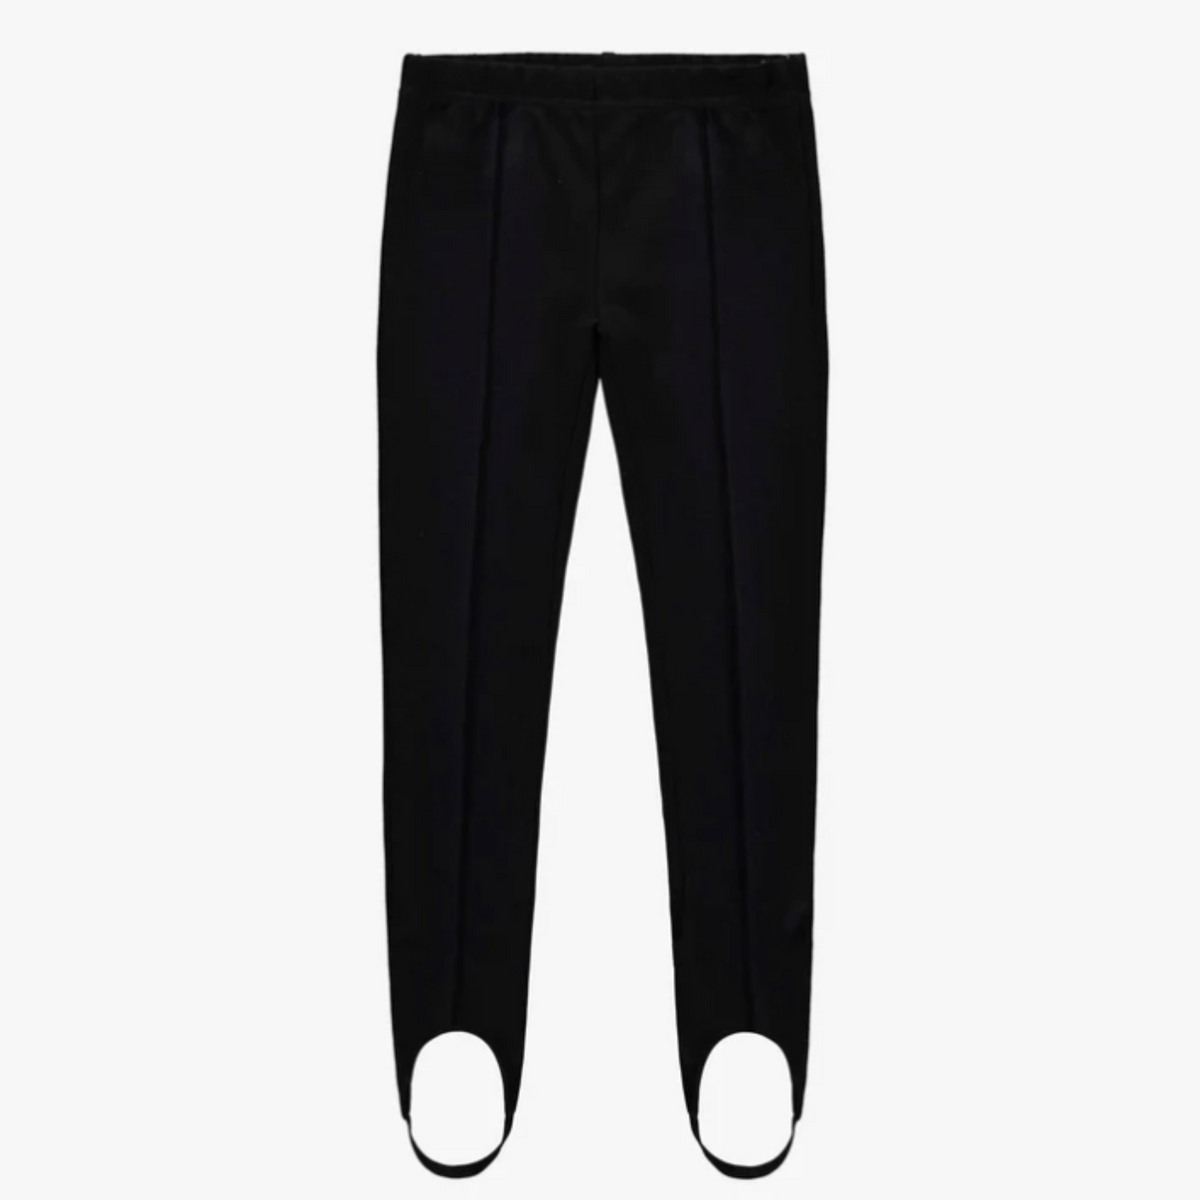 Charcoal Stirrup Pants With Foot Clips in Ponte De Roma, Child